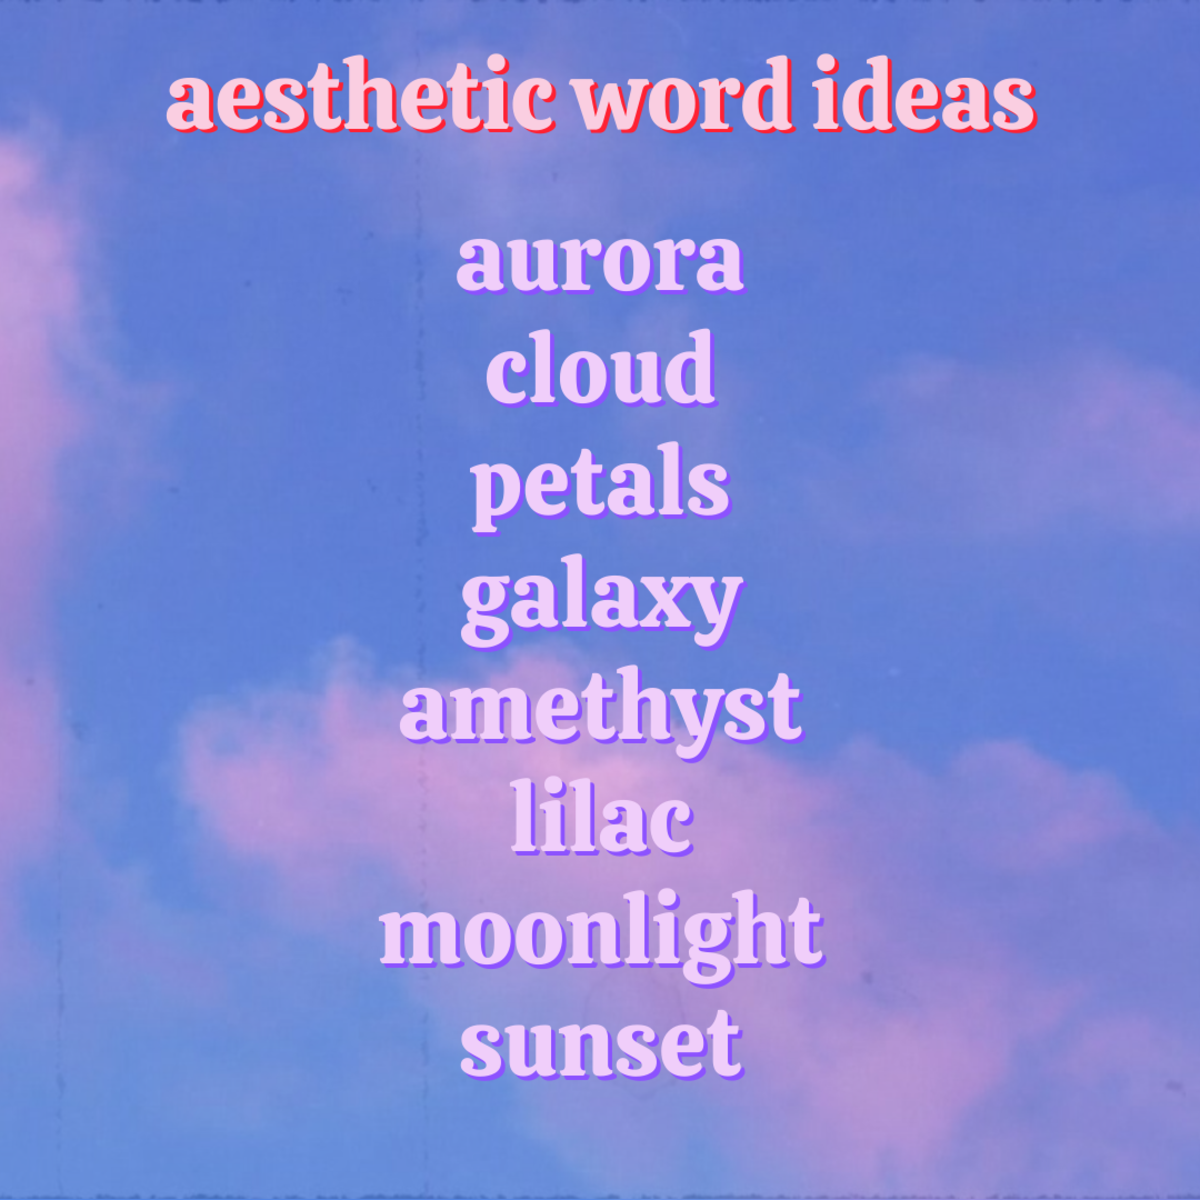 Here are some aesthetic words you could incorporate into your username!